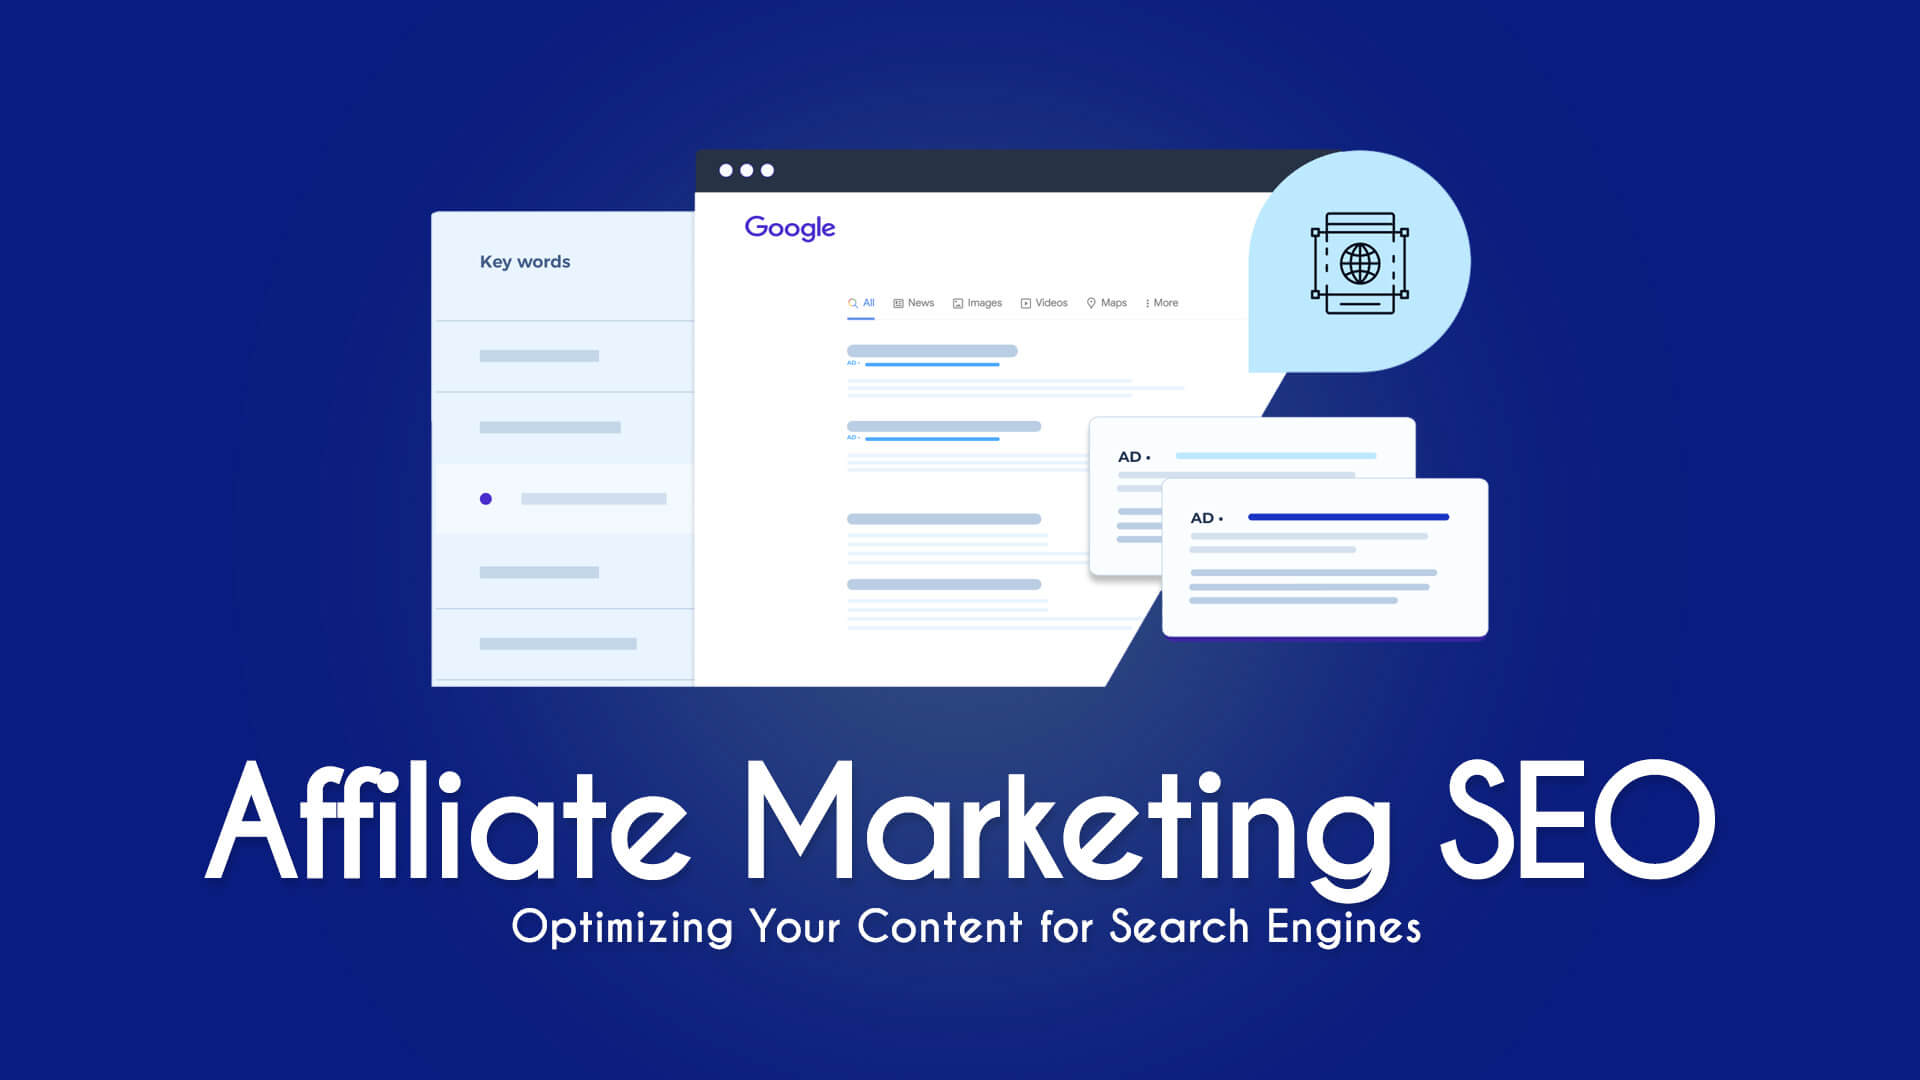 SEO for Affiliate Marketing Optimizing Your Content for Search Engines